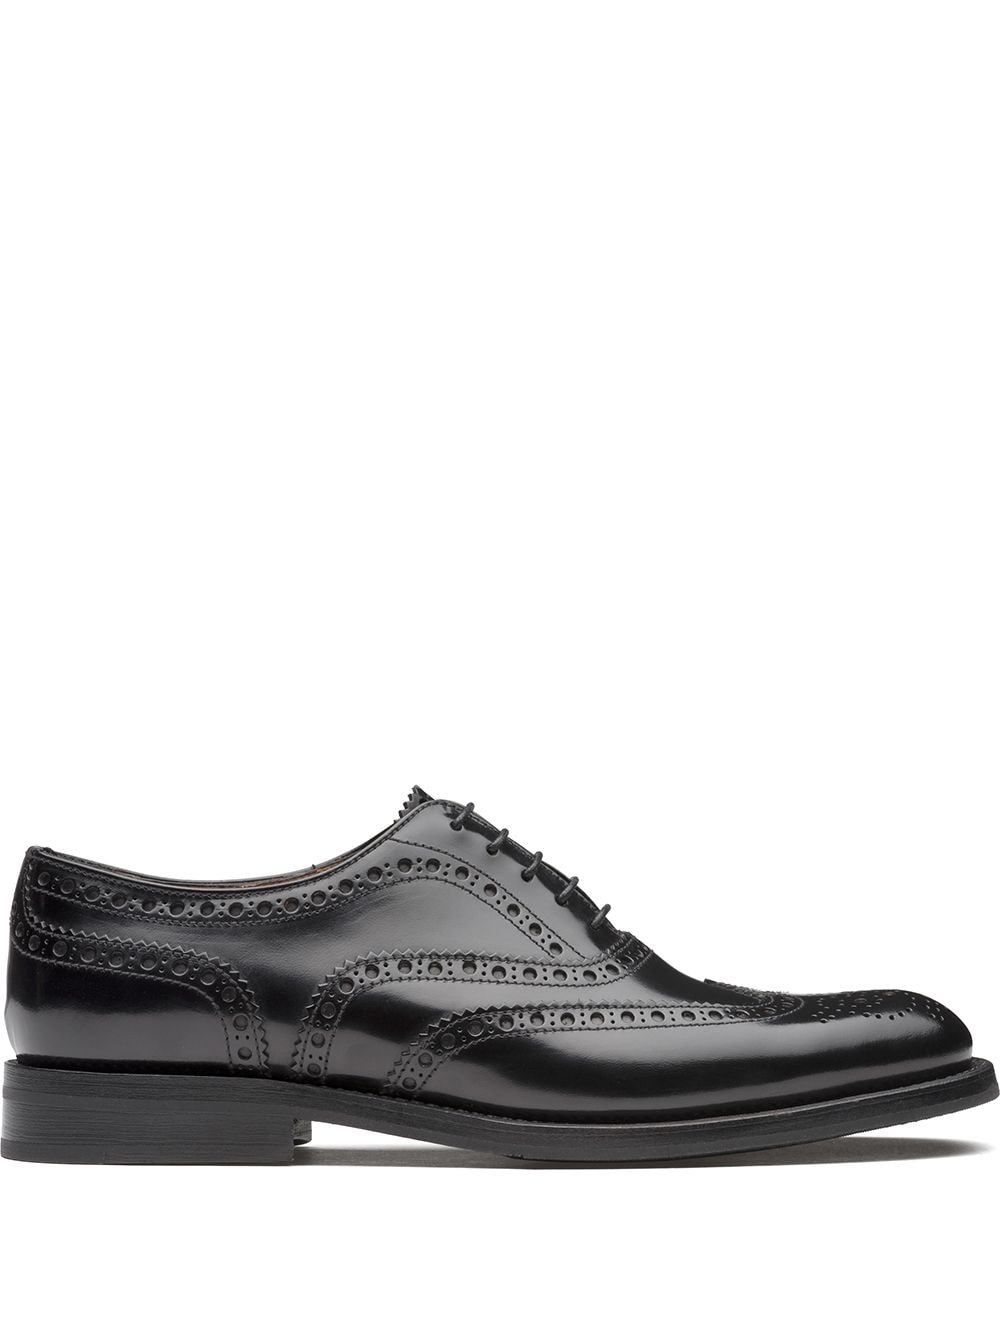 Image 1 of Church's Burwood 7 W Oxford shoes